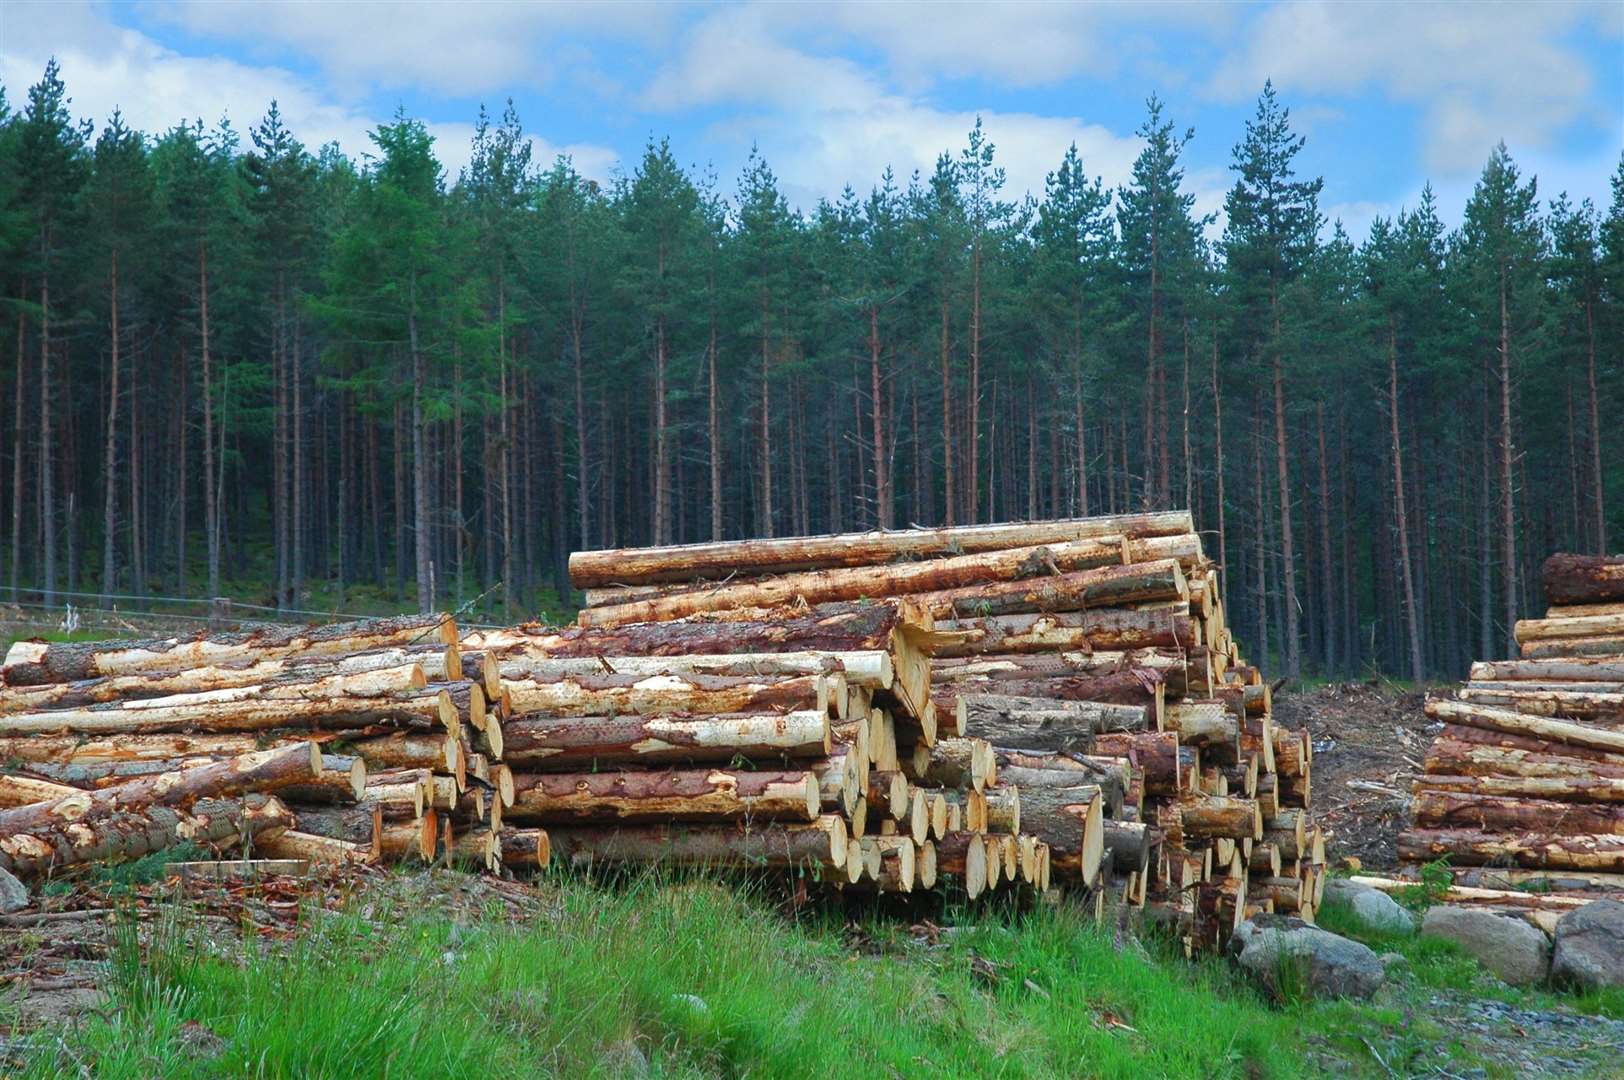 More money is to be spent on Nairnshire roads to help with timber extraction in the area.